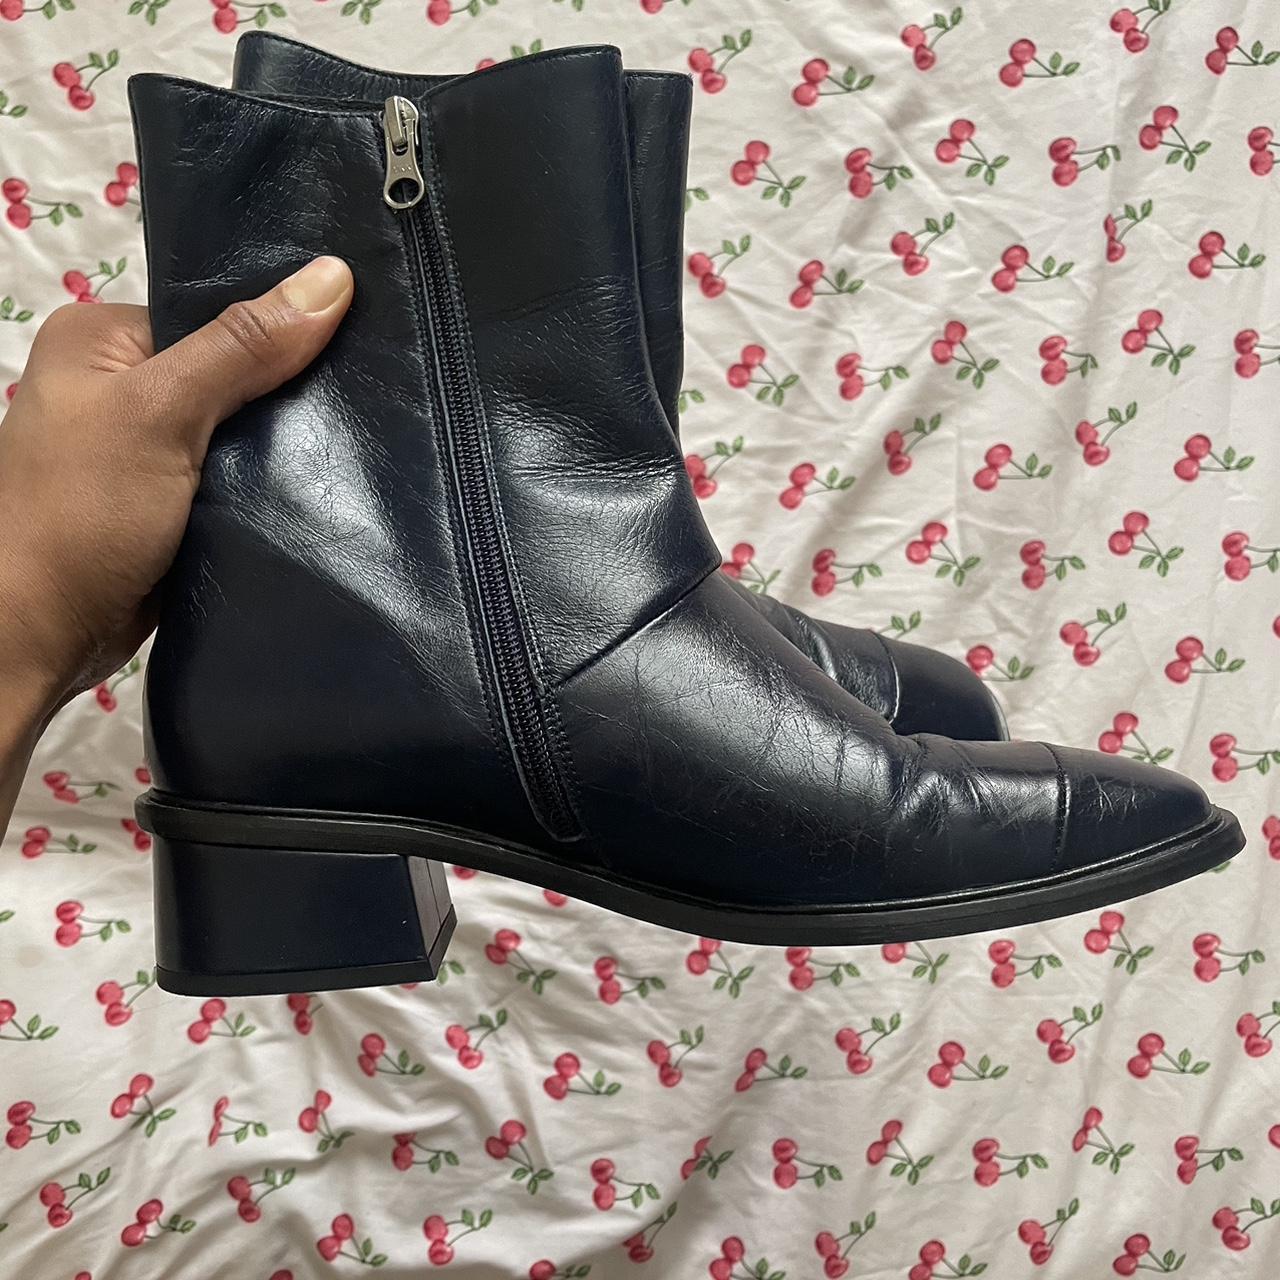 & Other Stories Women's Navy Boots